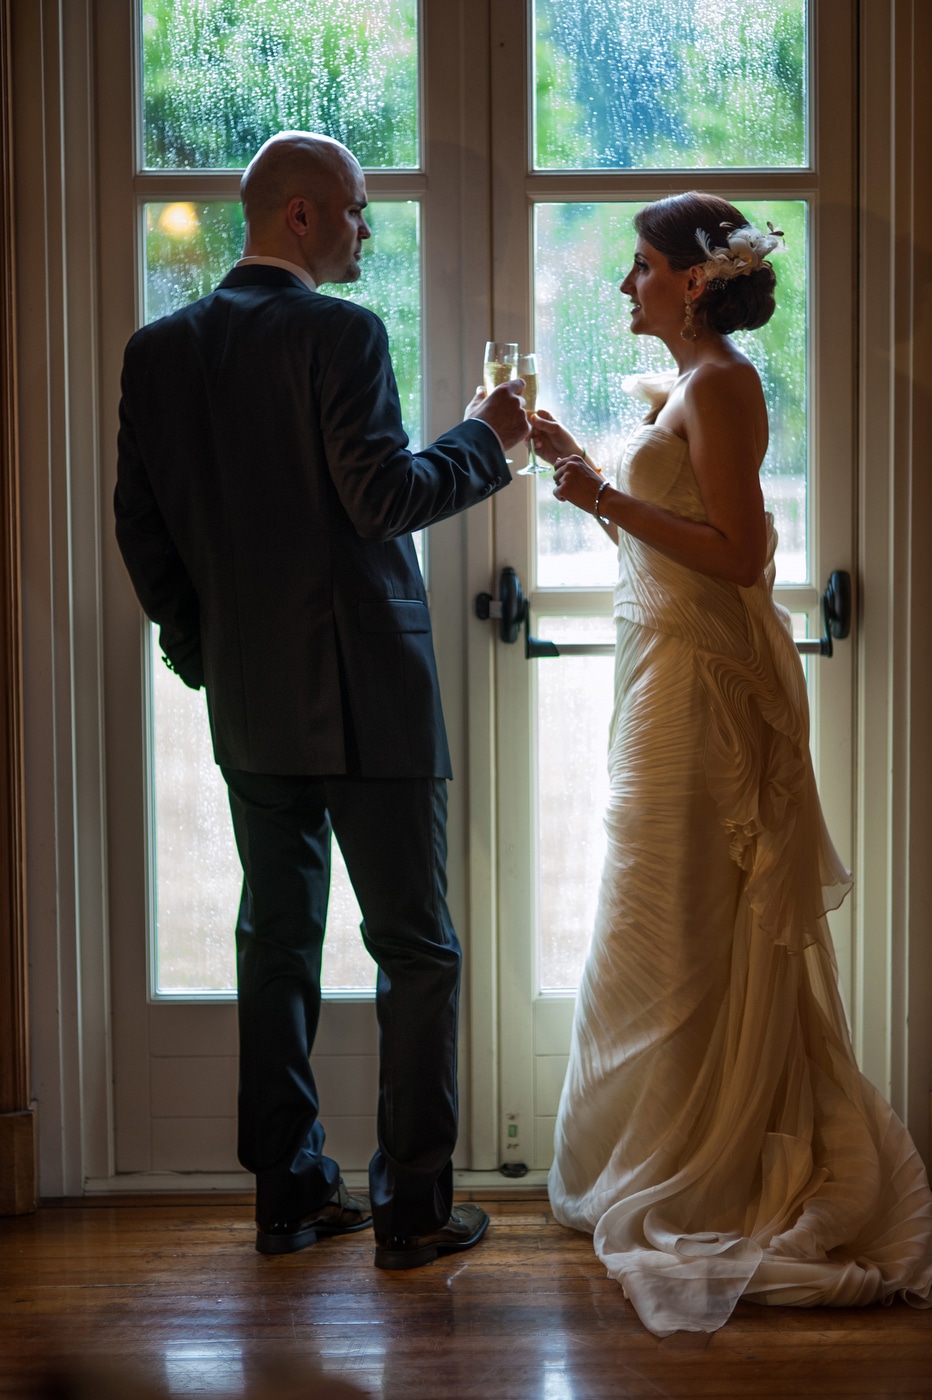 A bride and groom touch champagne flutes as they stand in front of a rain-soaked glass door.